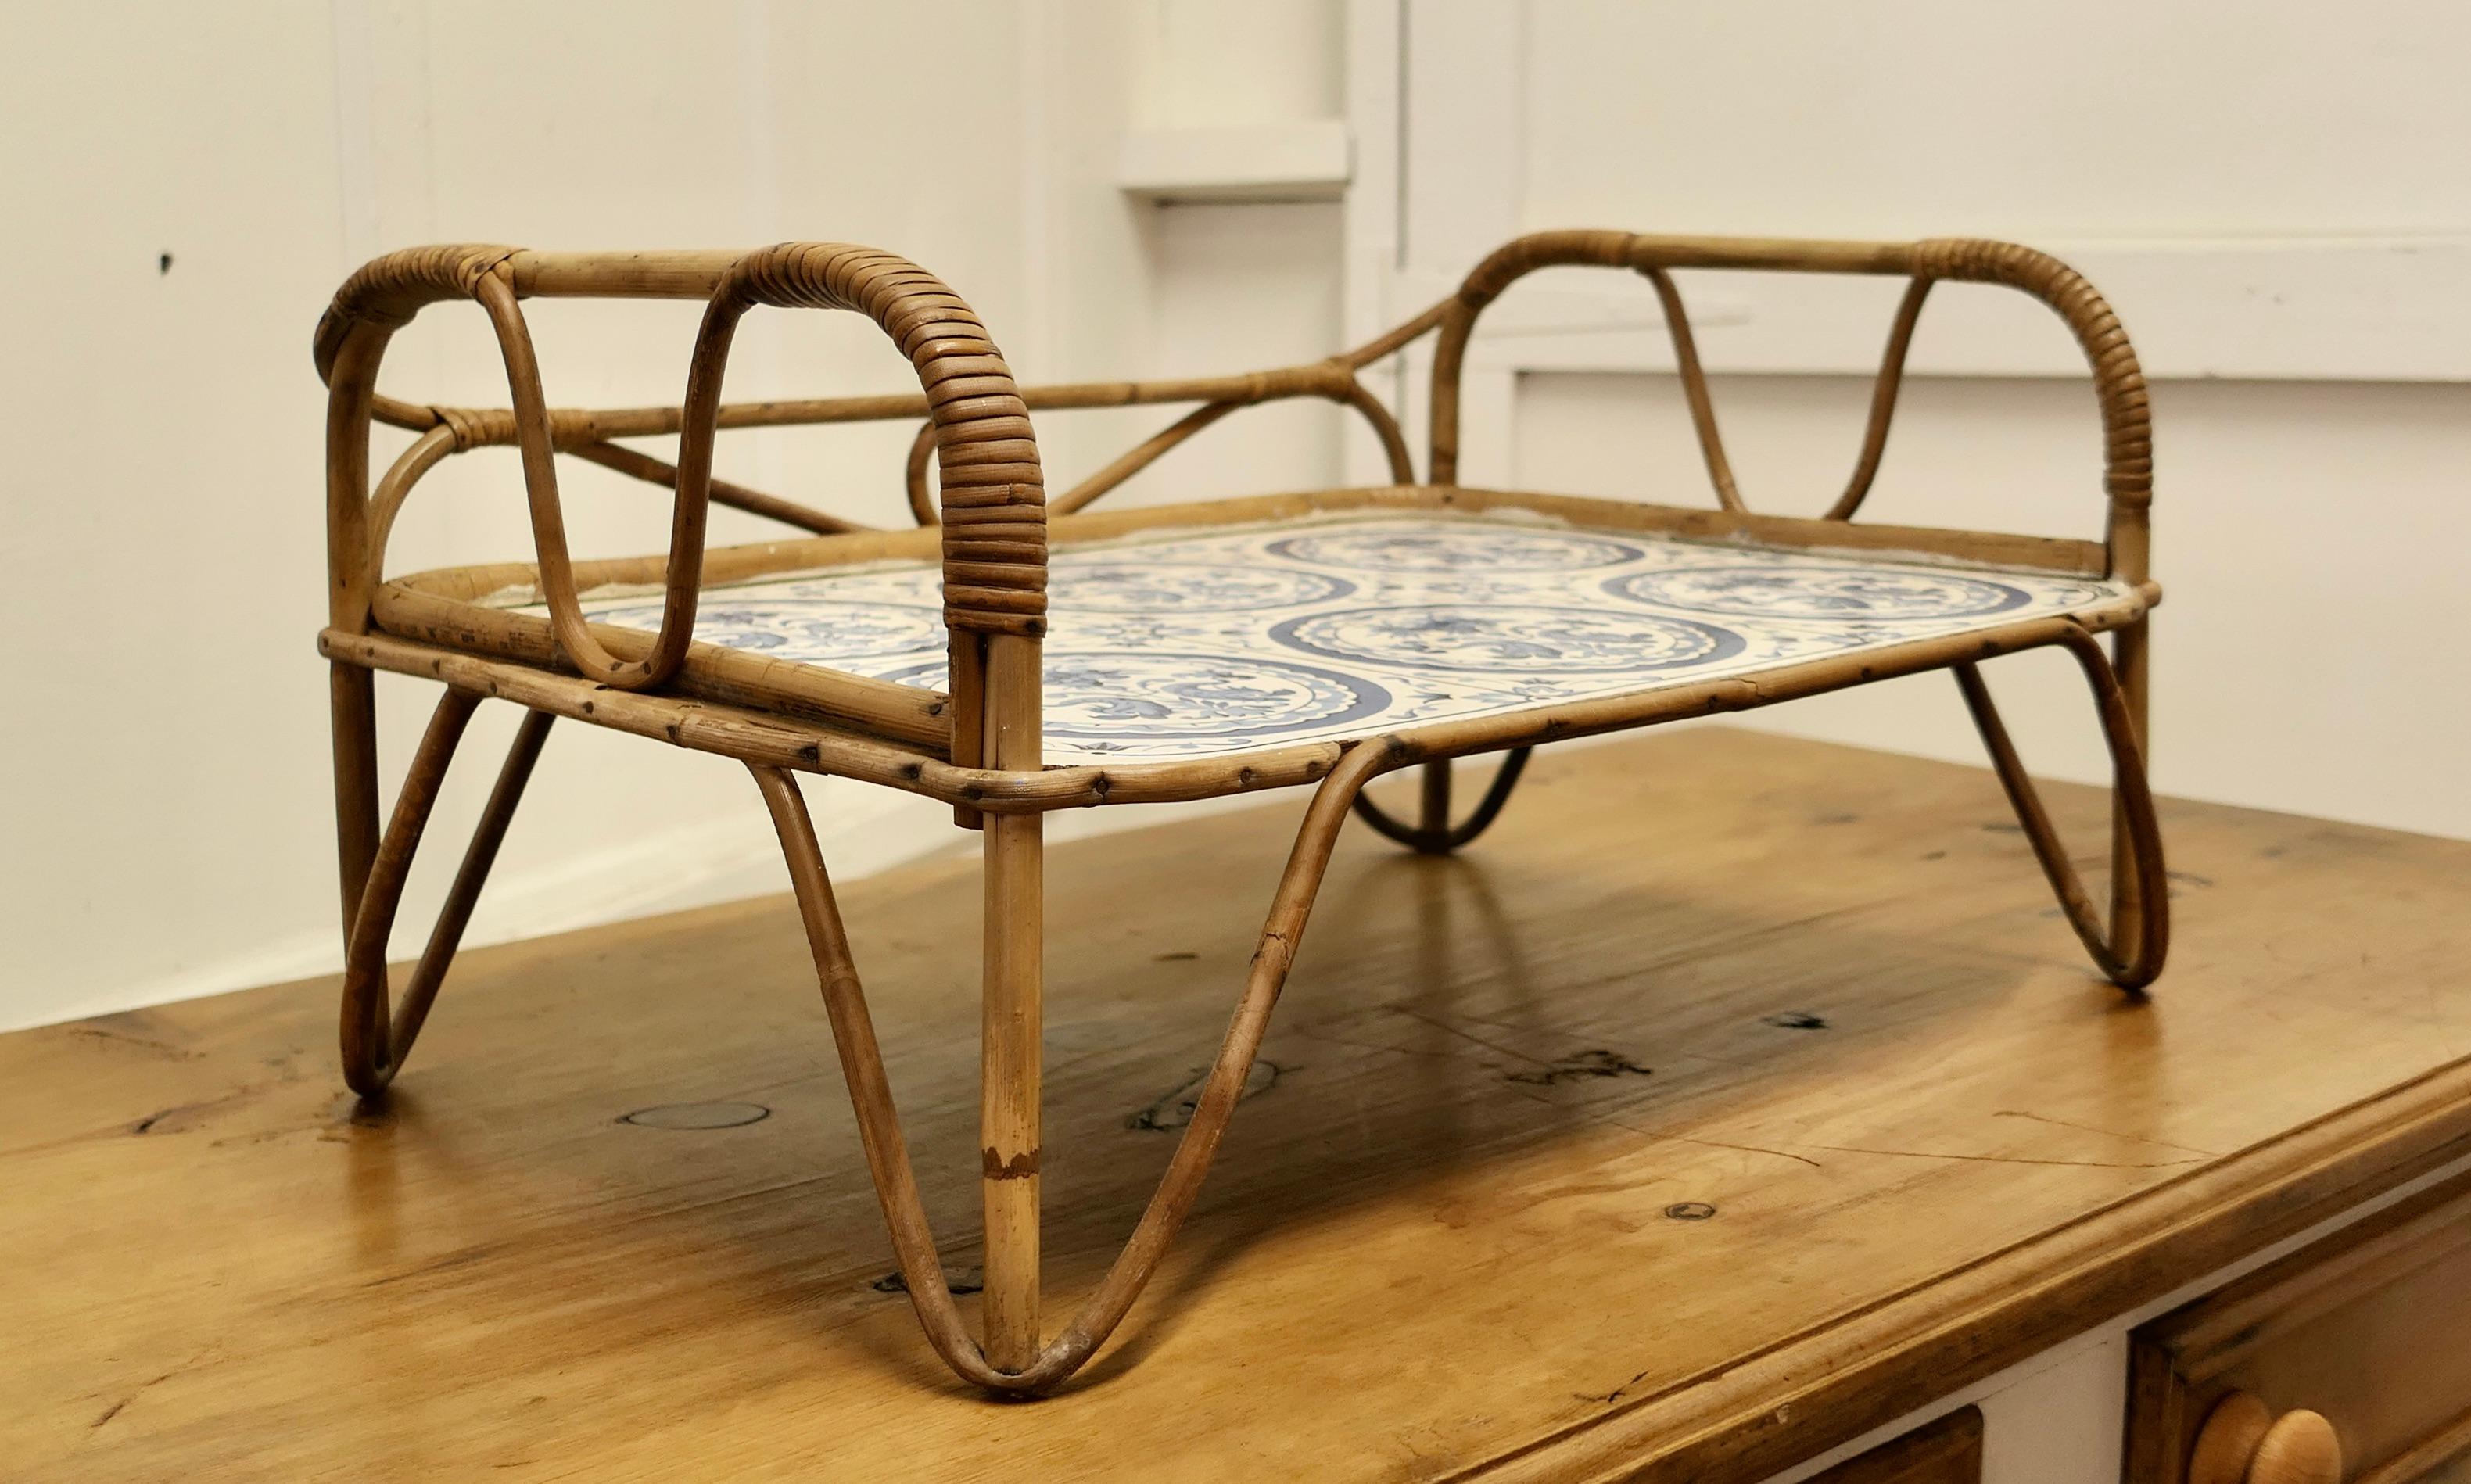 Mid-century bamboo and simulated delft bed tray.

A lightweight and very useful tray that sits over your lap for food and drinks or for reading 
The main body of the tray is made in bamboo and the table top is parchment paper in a blue and white